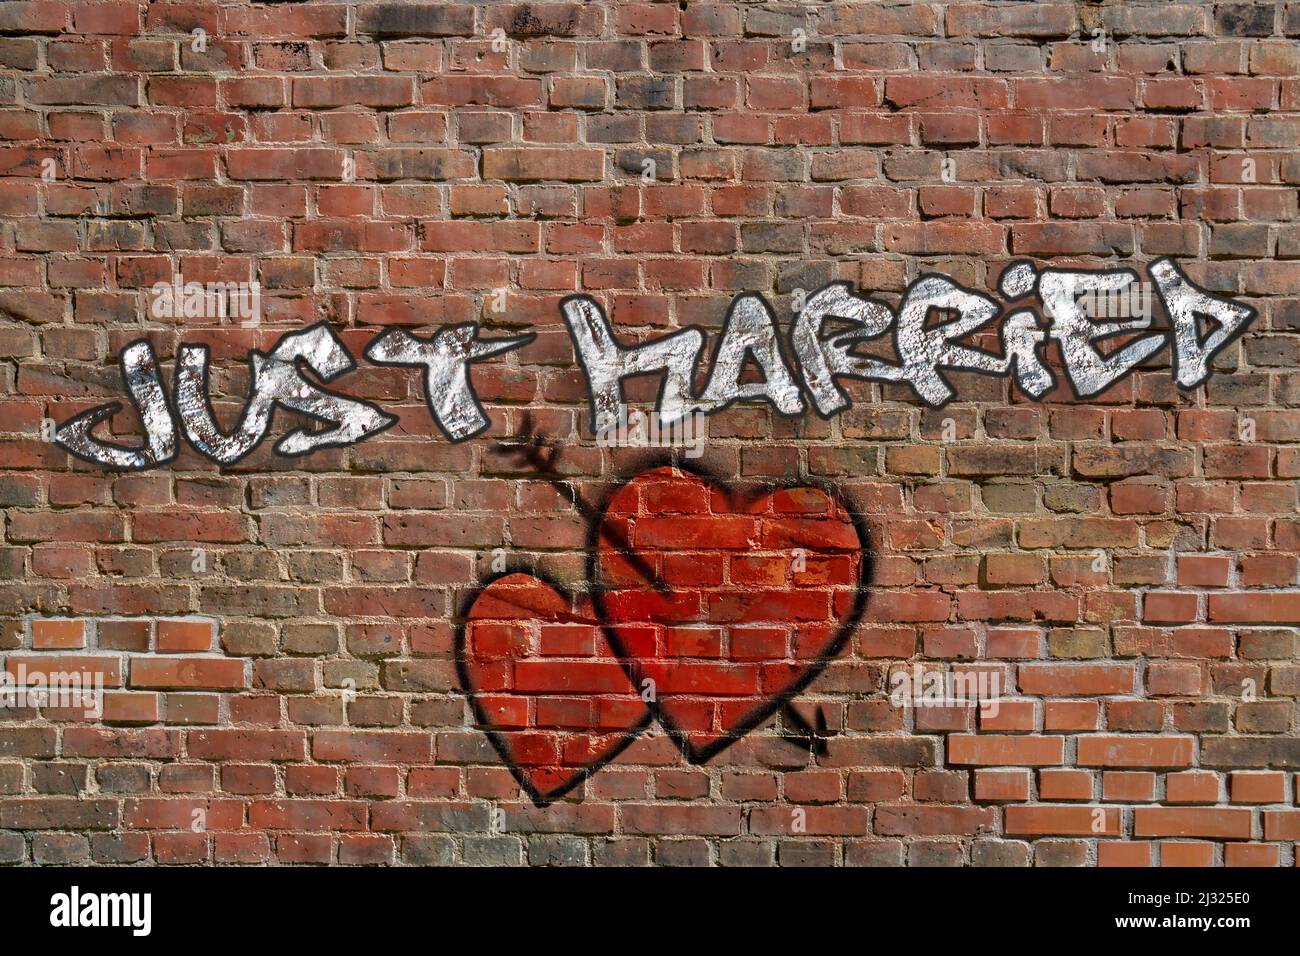 Silver Just Married graffiti with to sprayed red hearts on red brick wall Stock Photo